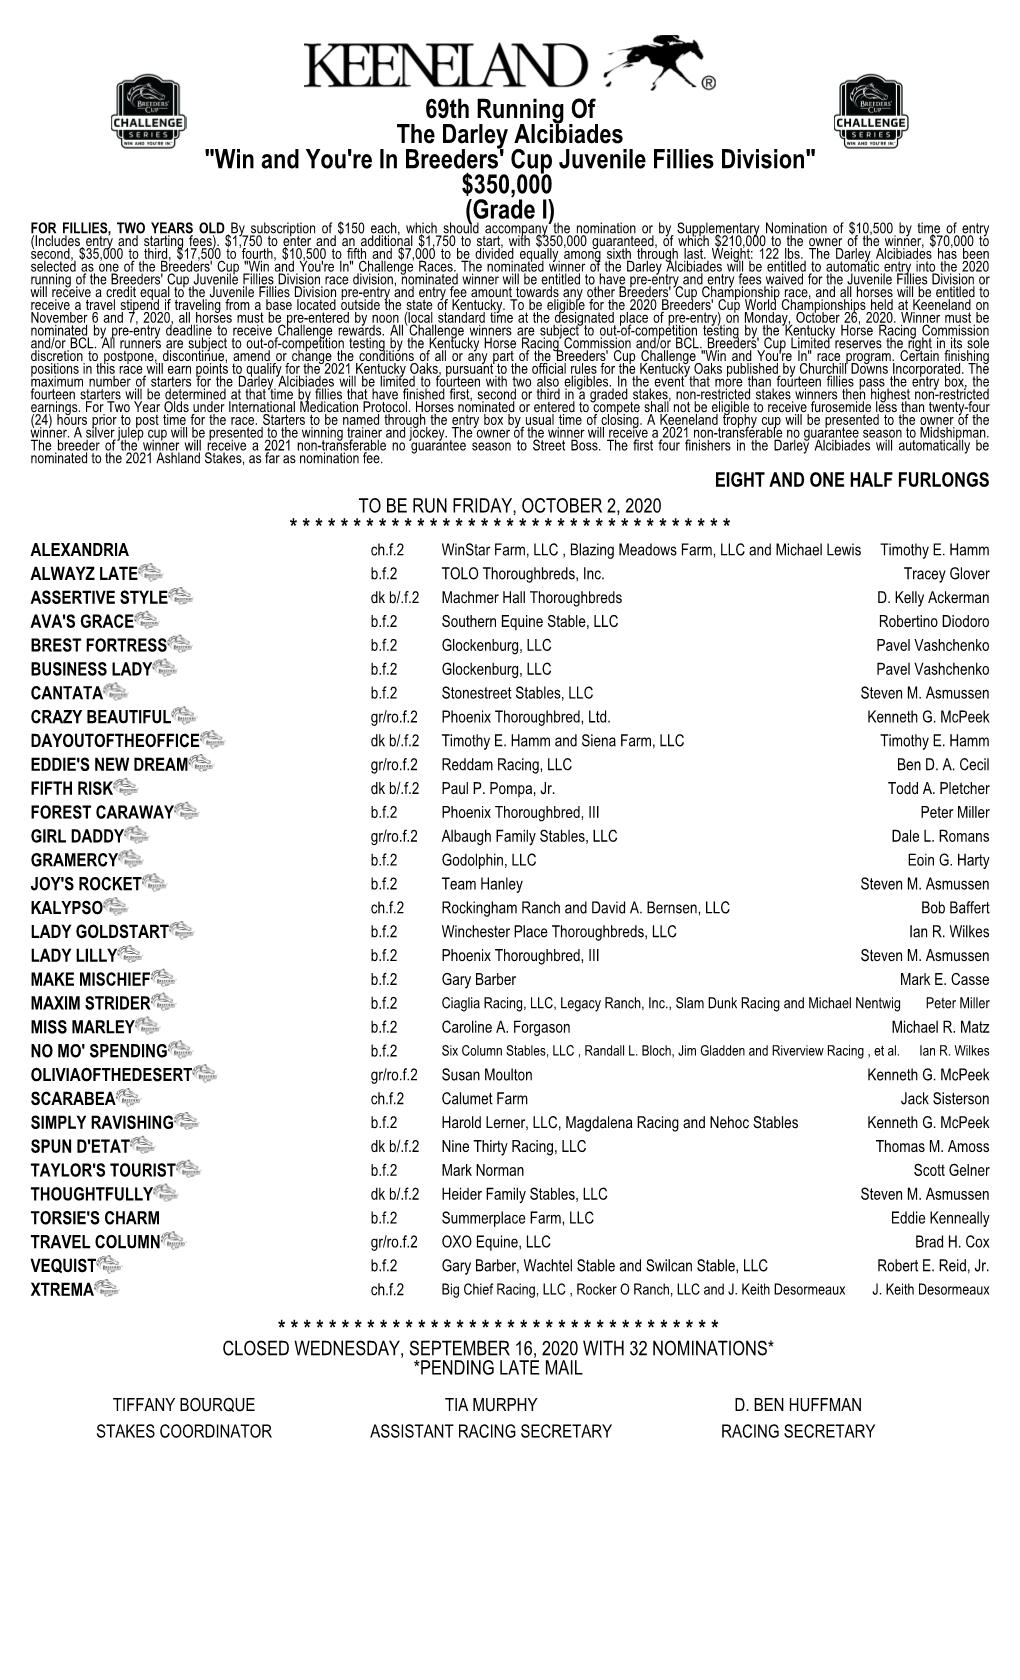 69Th Running of the Darley Alcibiades "Win And